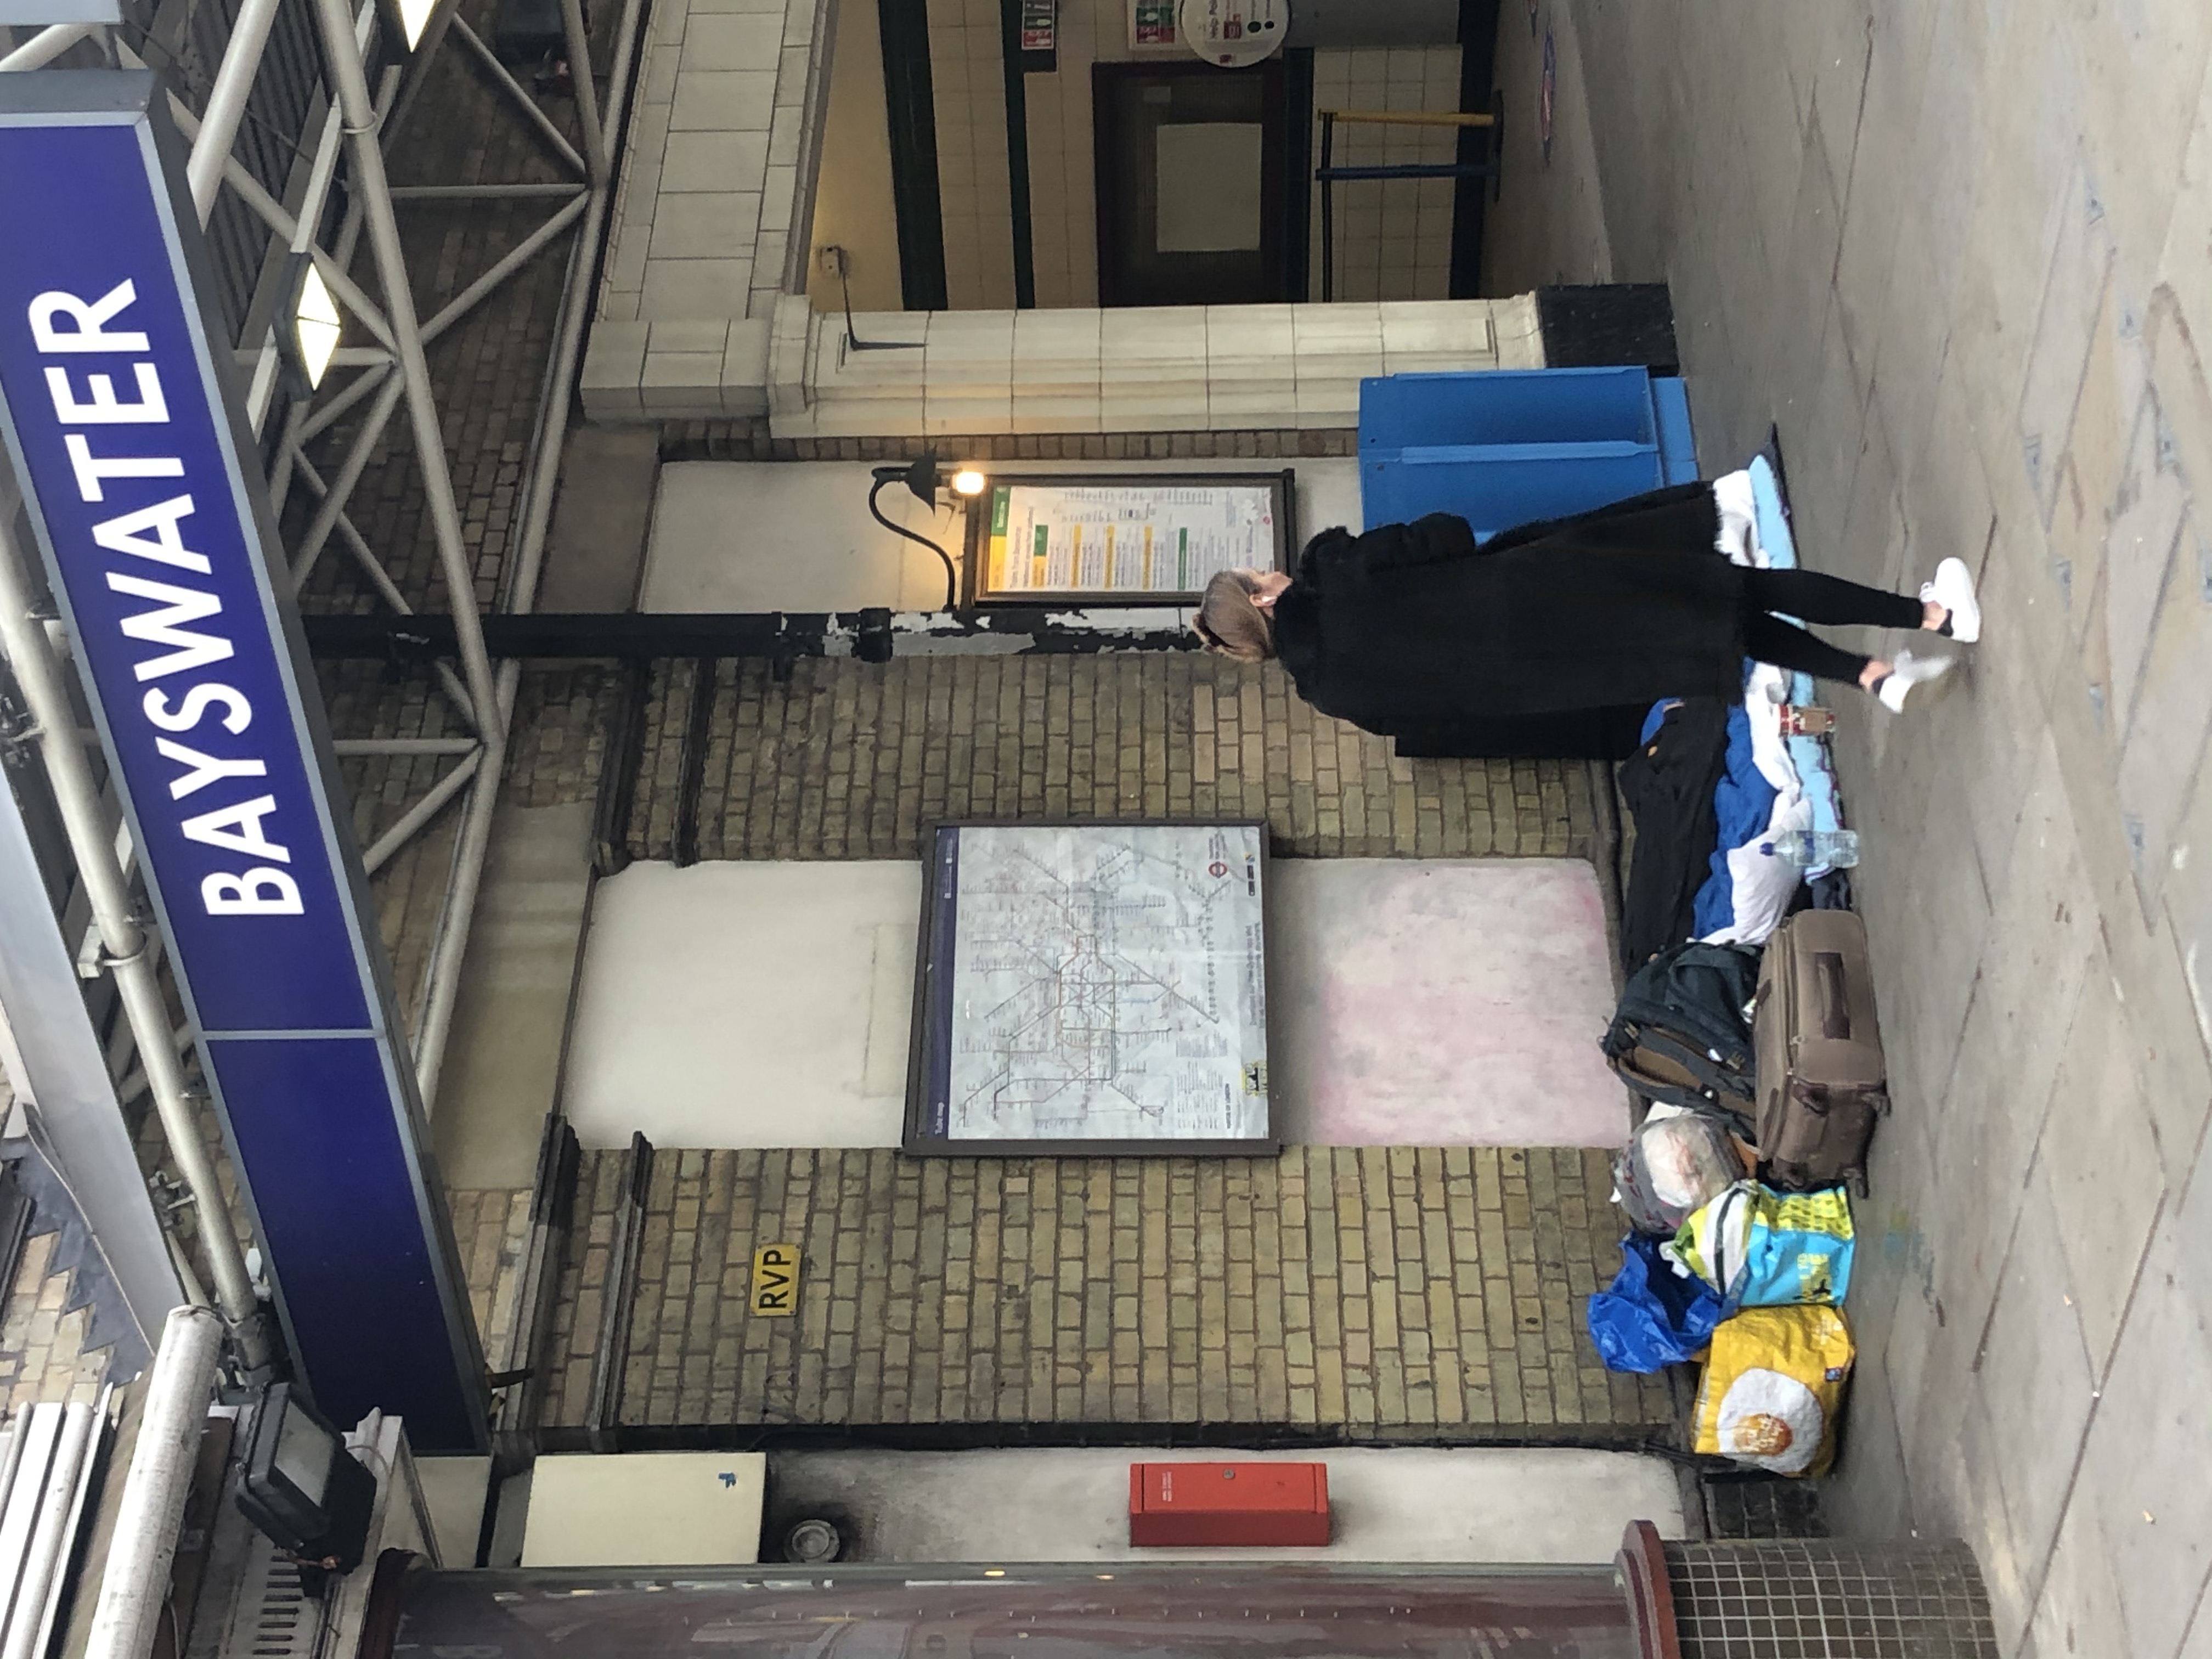 The plight of London Homesless outside Bayswater tube station